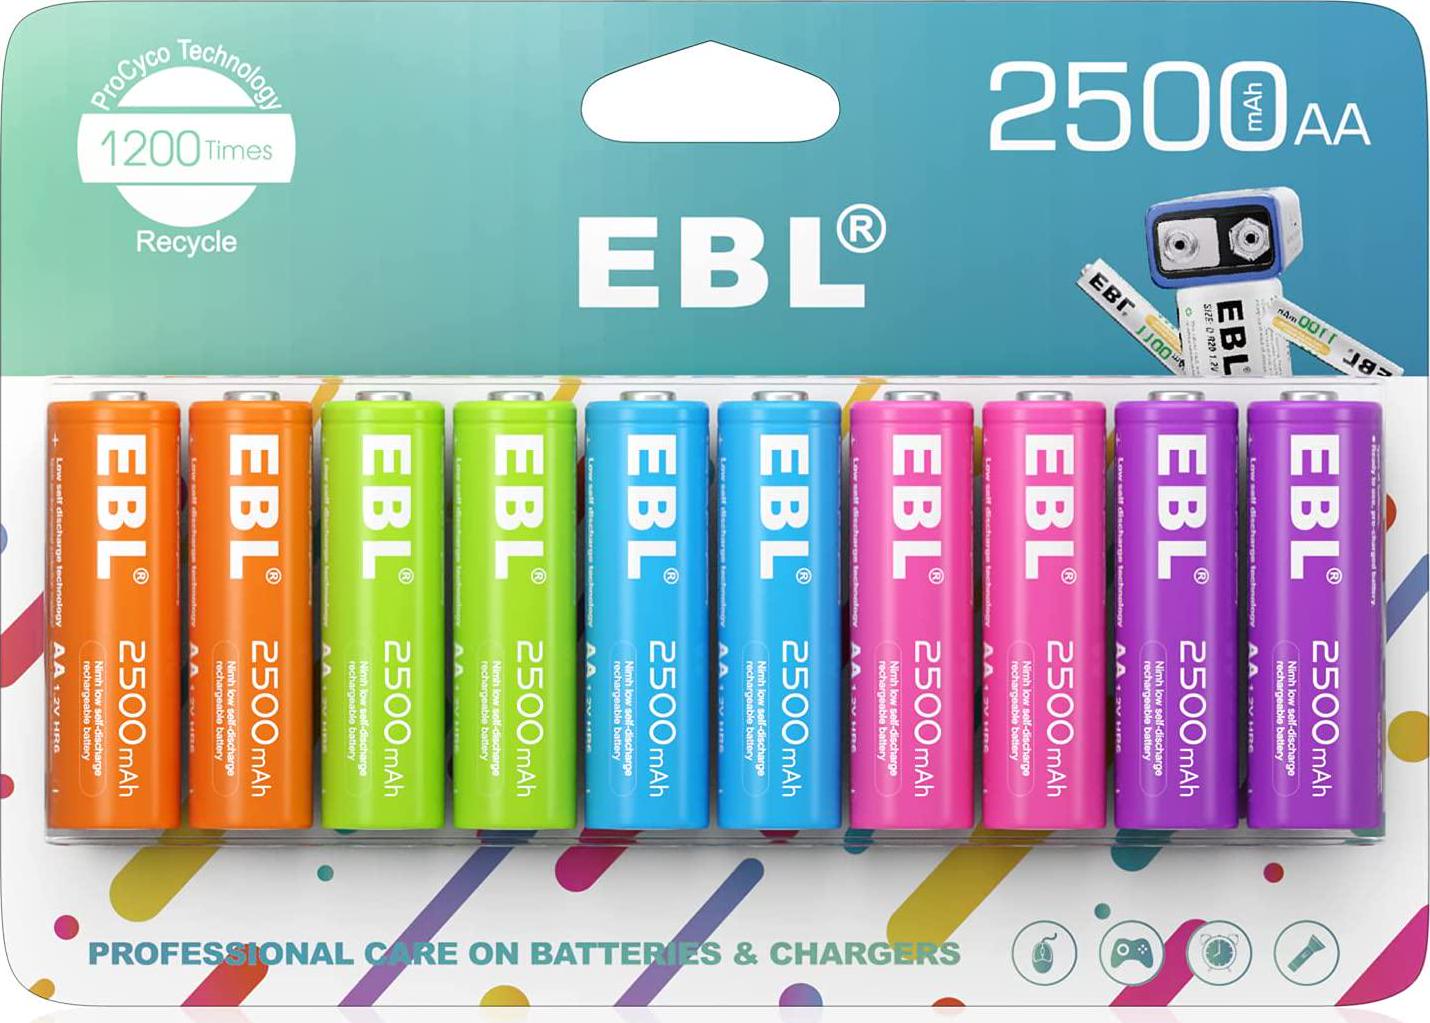 EBL, EBL Rechargeable AA Batteries 2500mAh 1.2V Pre-Charged Ni-MH Double AA Battery Color 1200 Cycles Long Lasting, 10 Pack